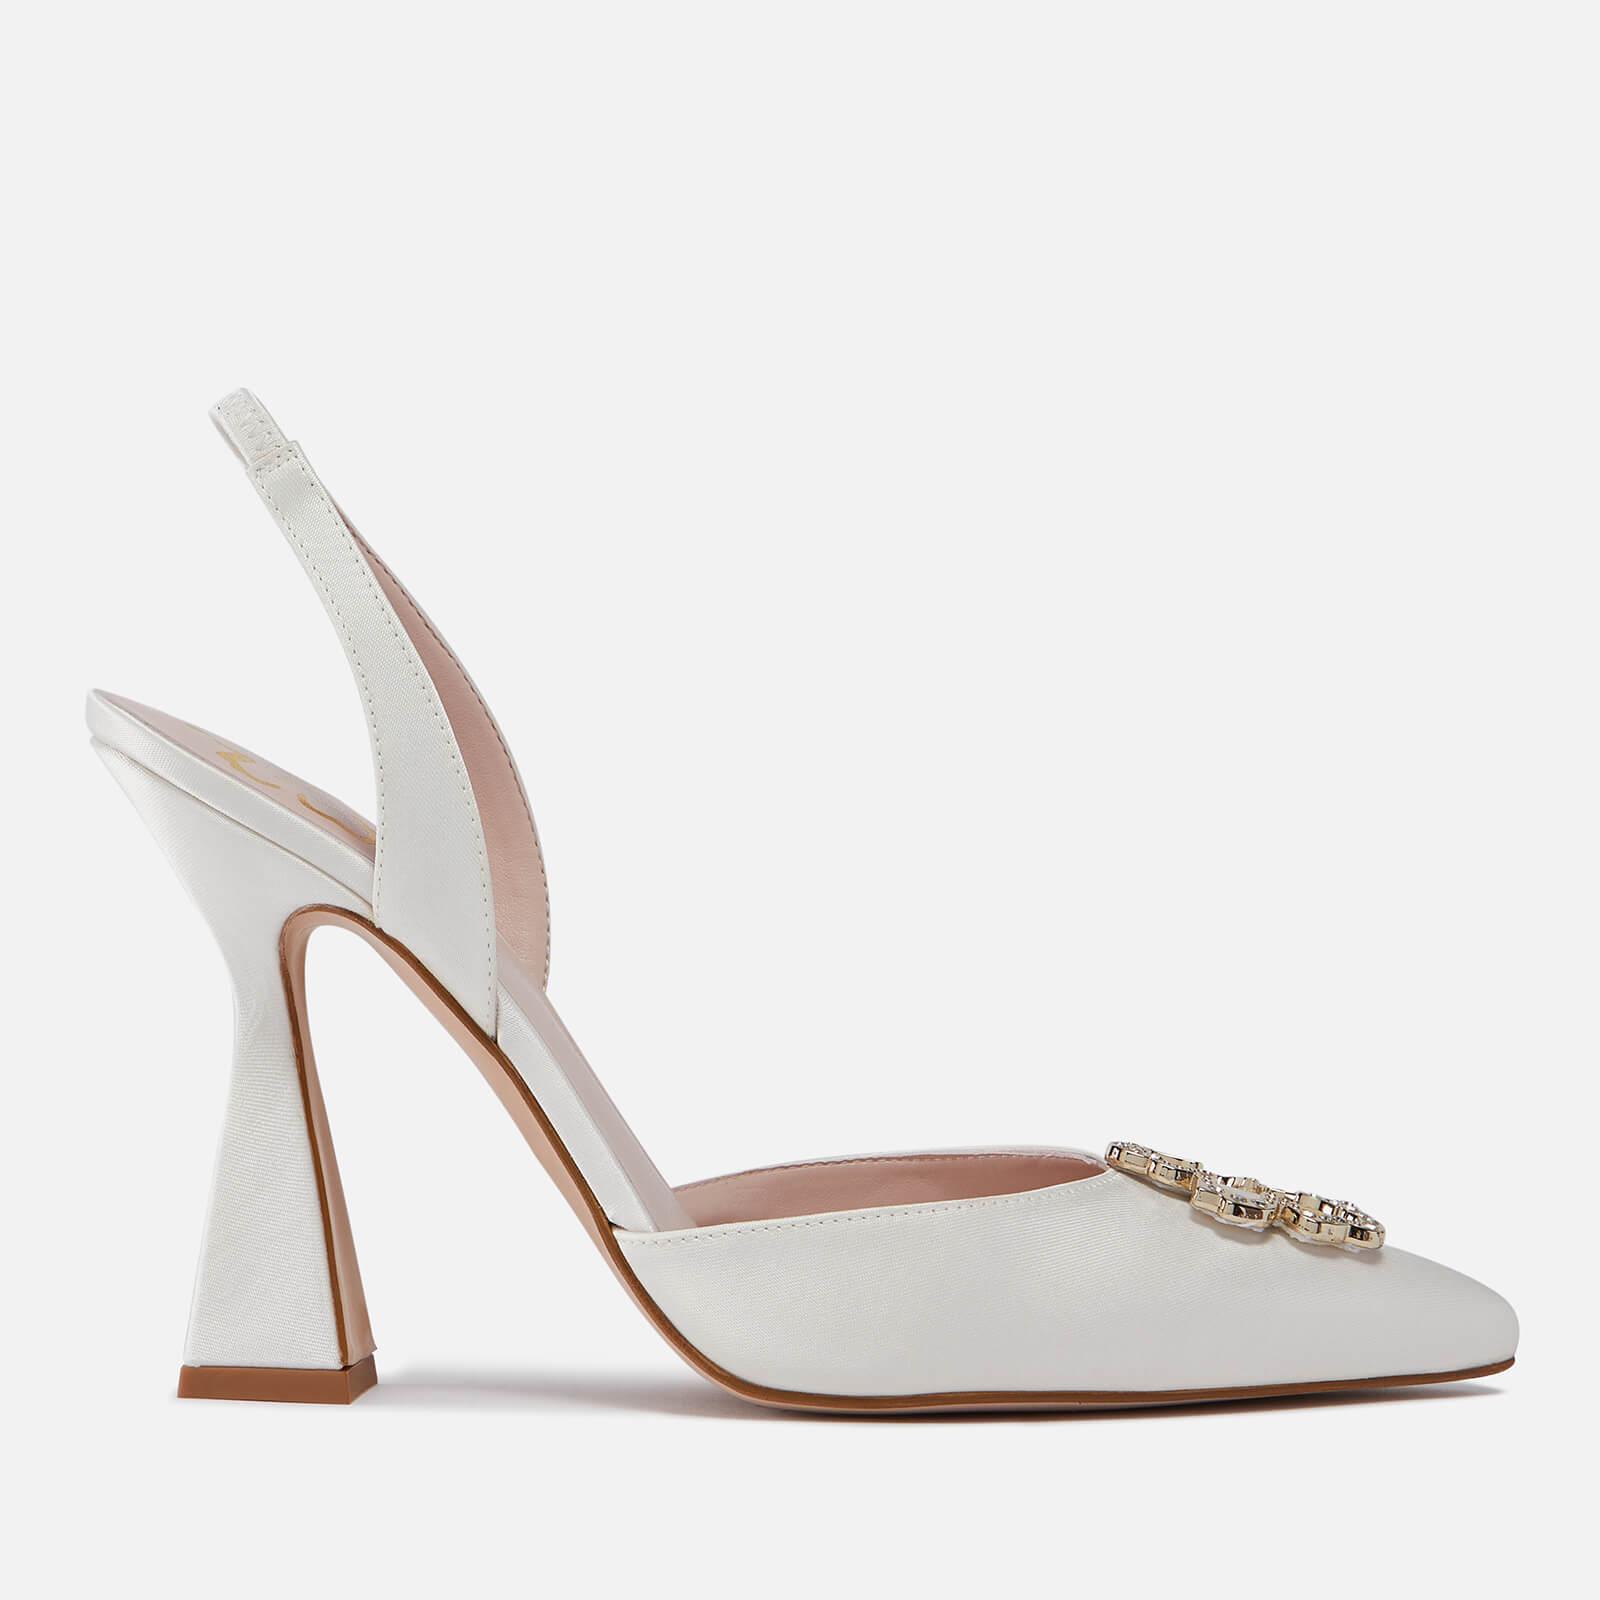 Ted Baker Betzay Satin Heeled Slingback Pumps in White | Lyst